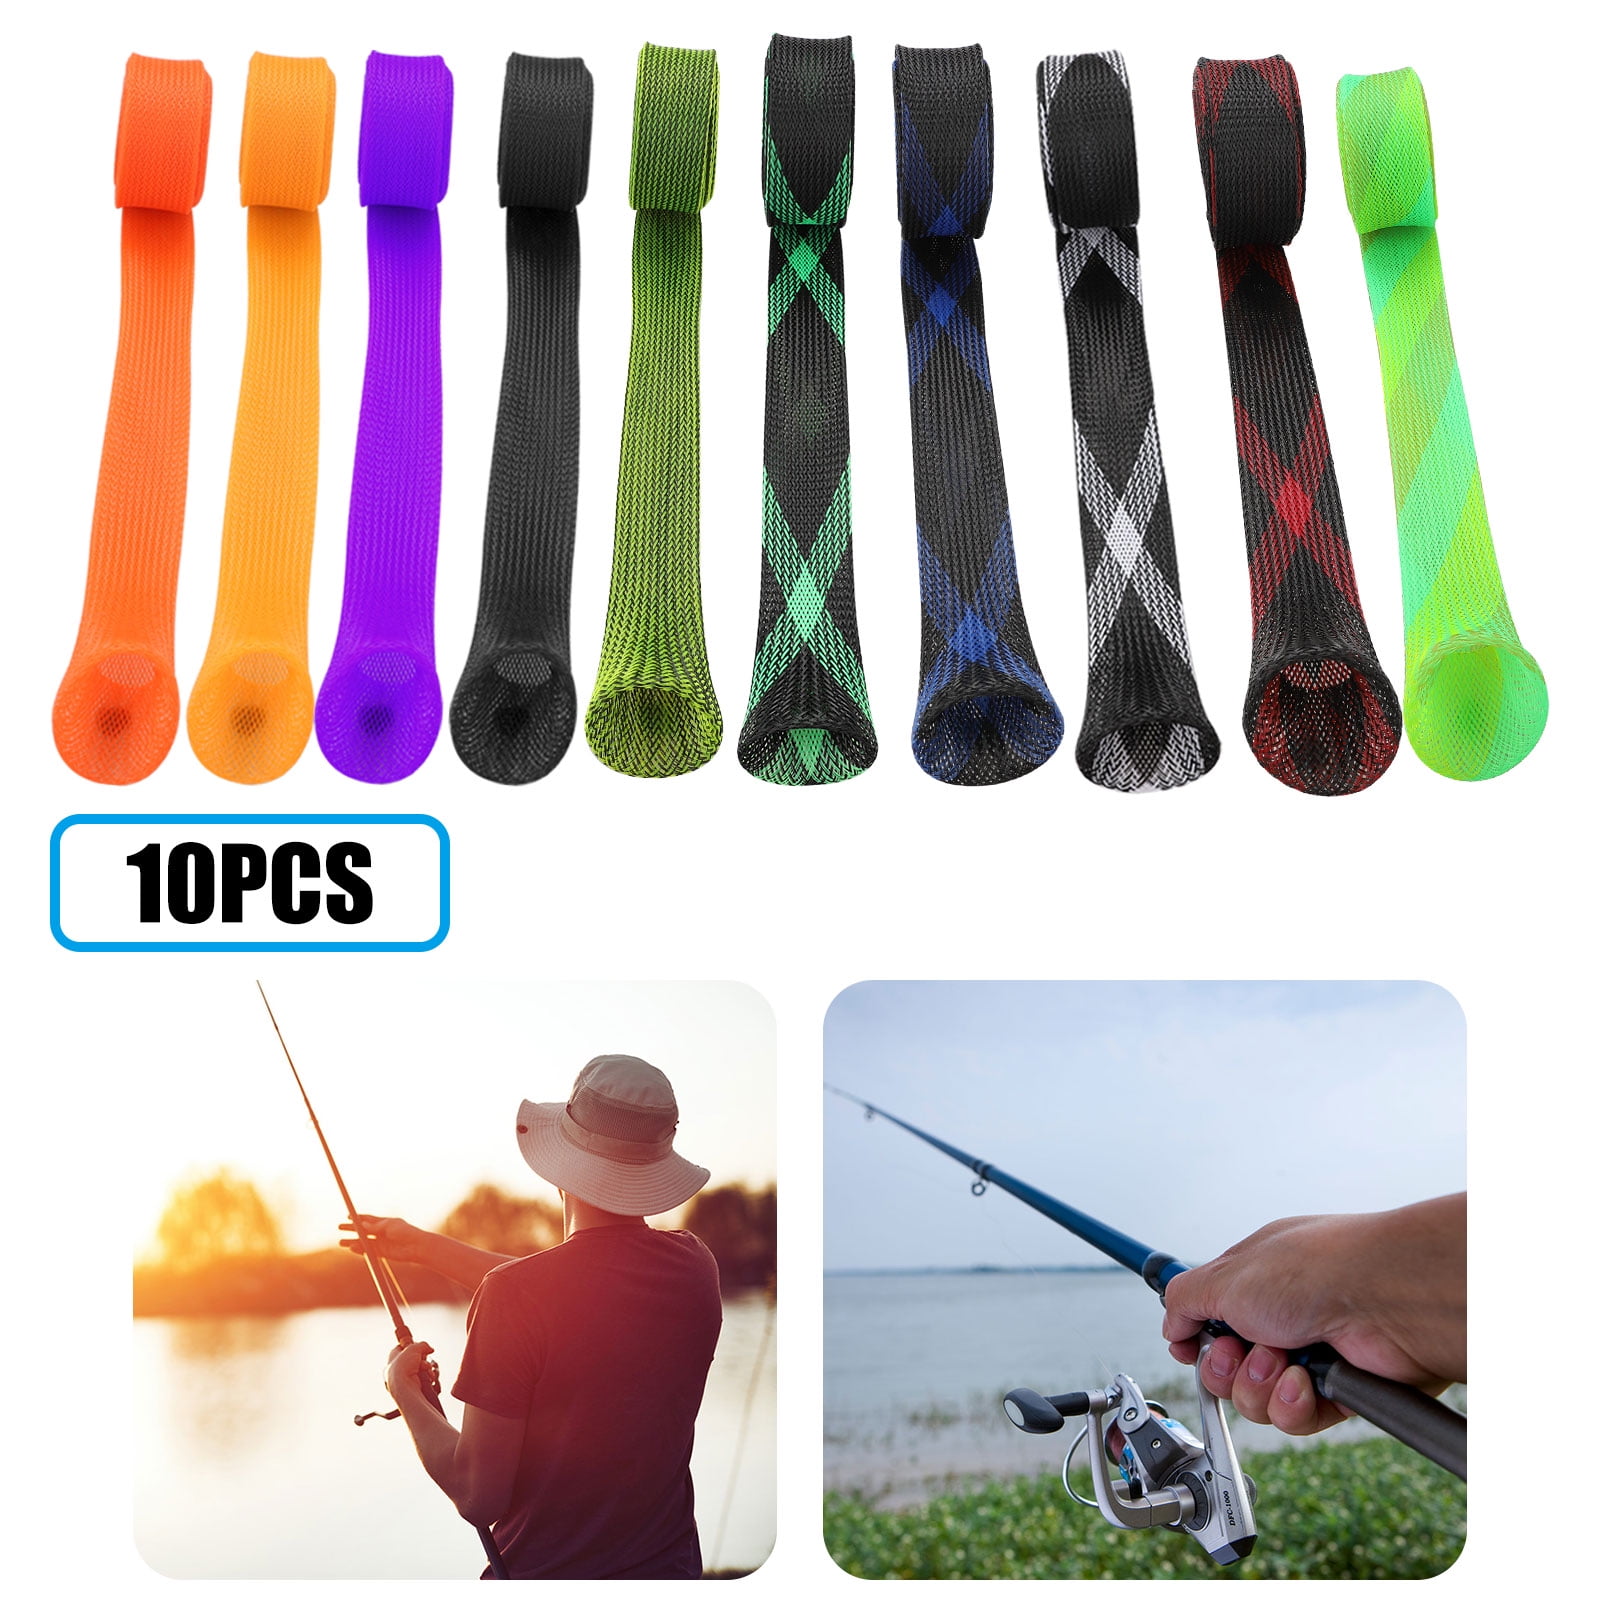 Rod sleeve for Fishing Rods cloth  NEW various sizes Poles Fishing Rod Bag 